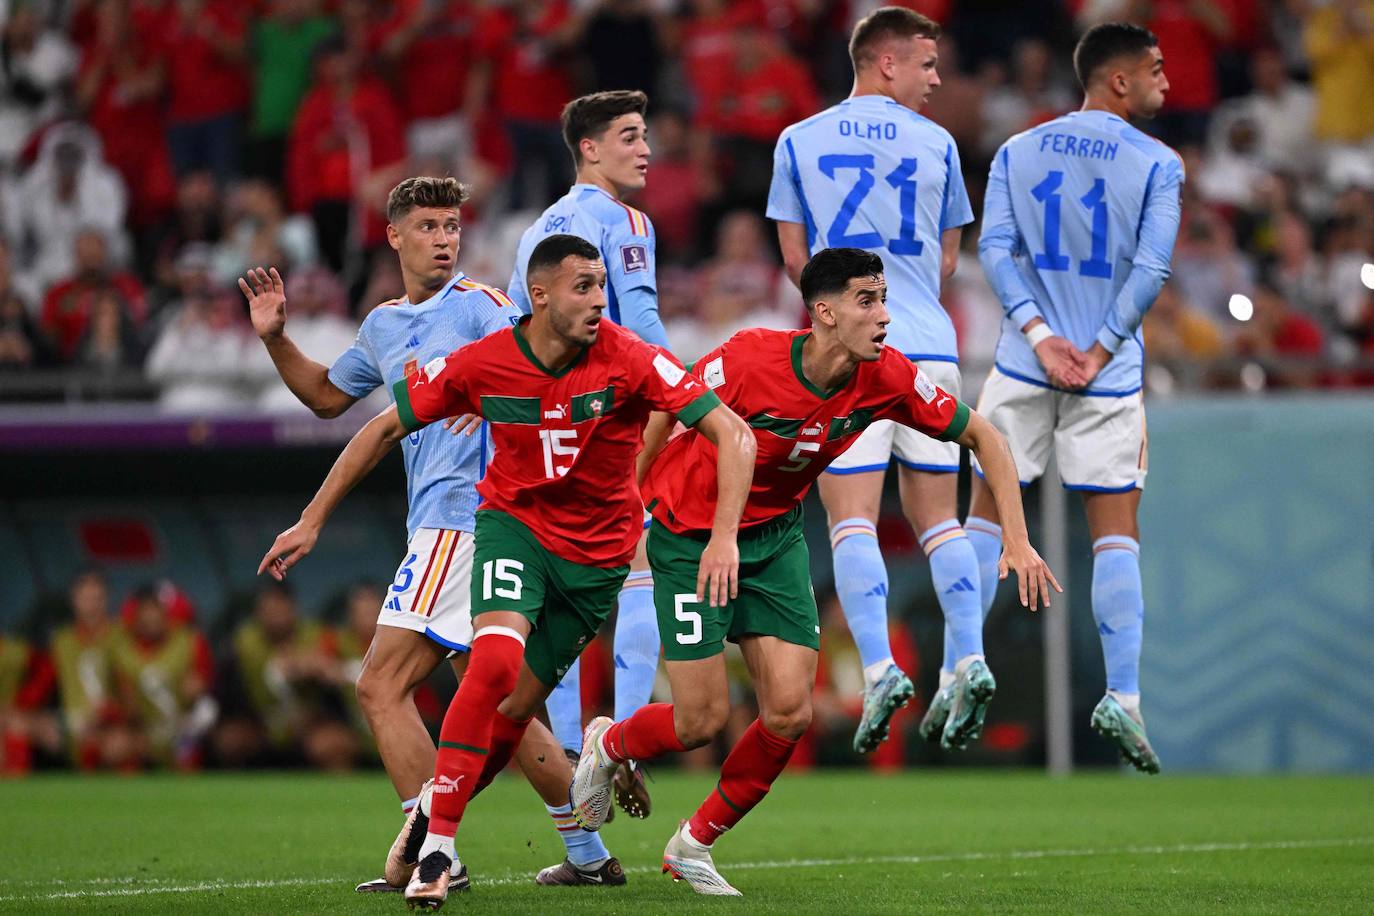 La Roja lost to Morocco on penalties in their quarter-final this Tuesday.